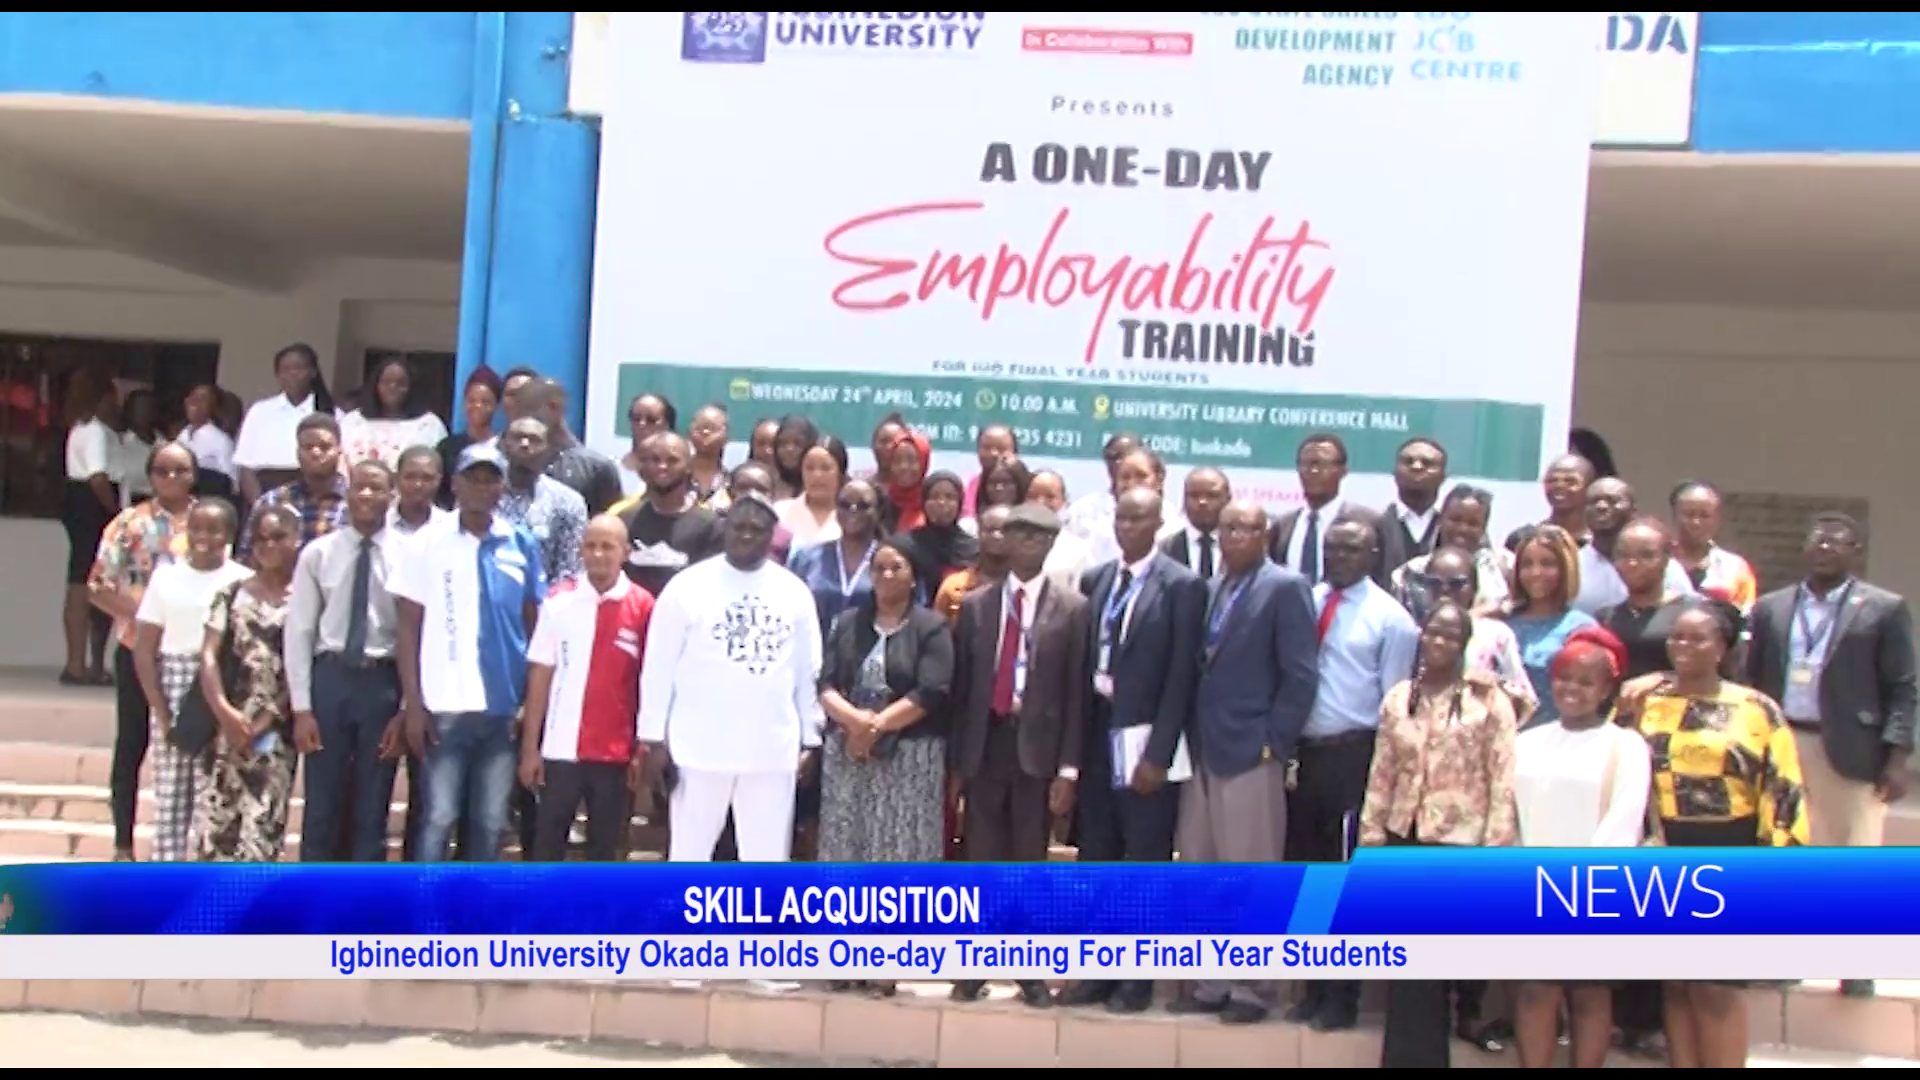 Igbinedion University Okada Holds One-day Training For Final Year Students